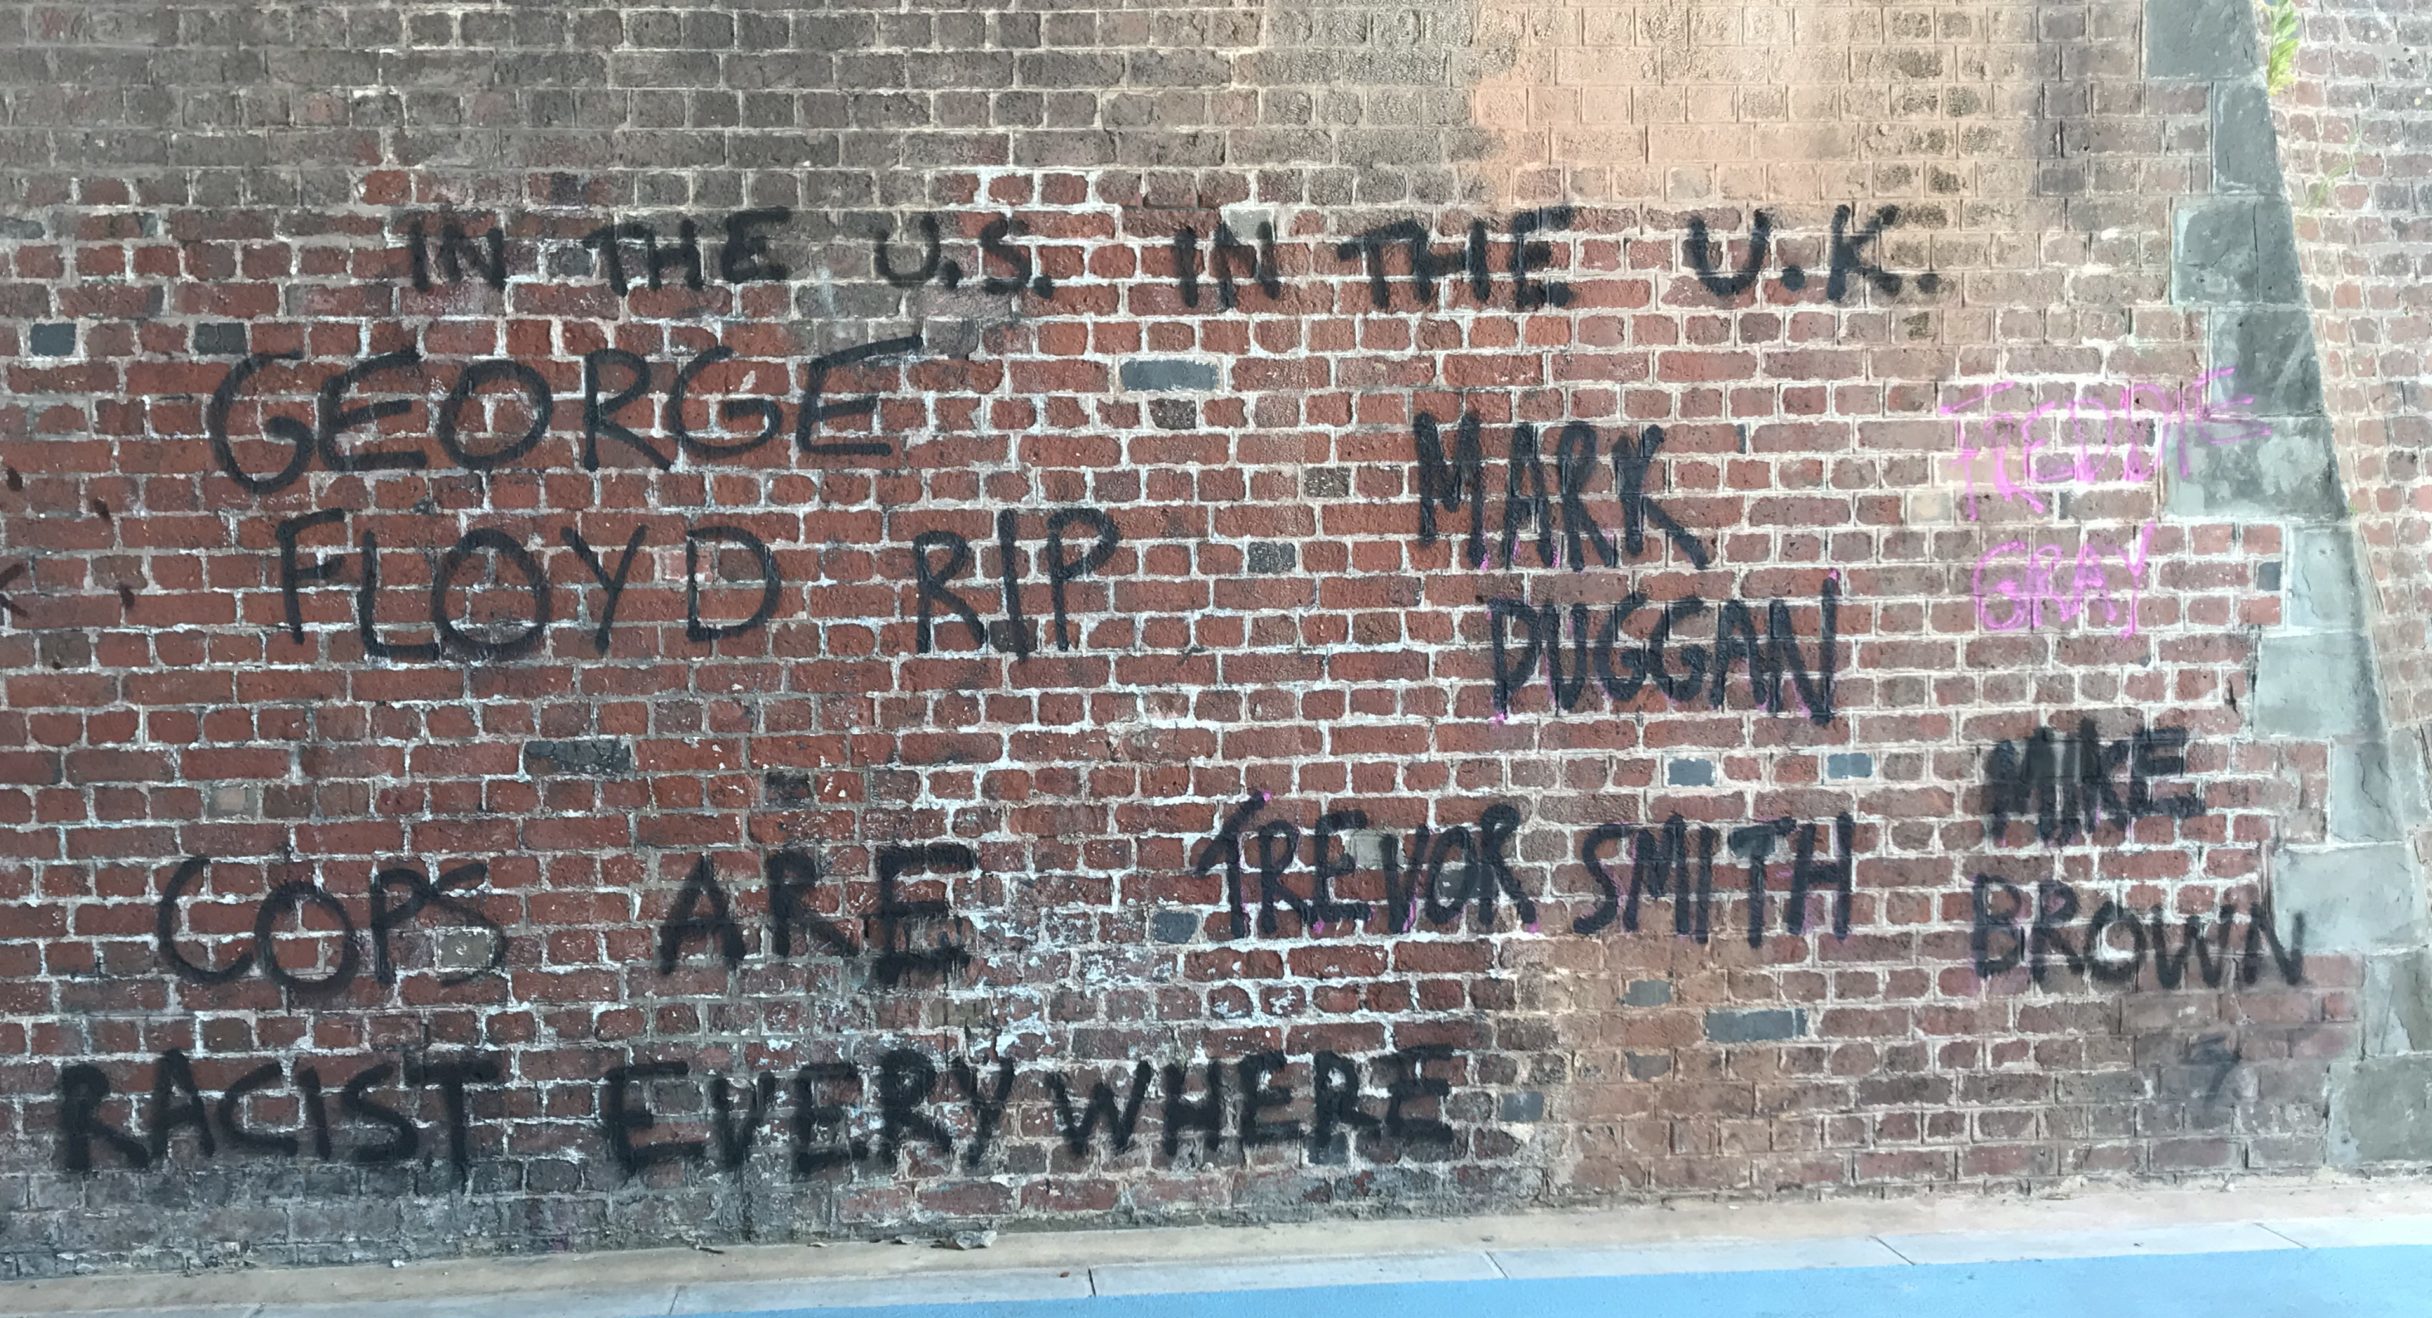 A brick wall in Bristol. On the wall is some graffiti rendered in black spray paint: "In the US, in the UK, the police are racist everywhere: George Floyd RIP. Mark Duggan. Trevor Smith. Mike Brown"